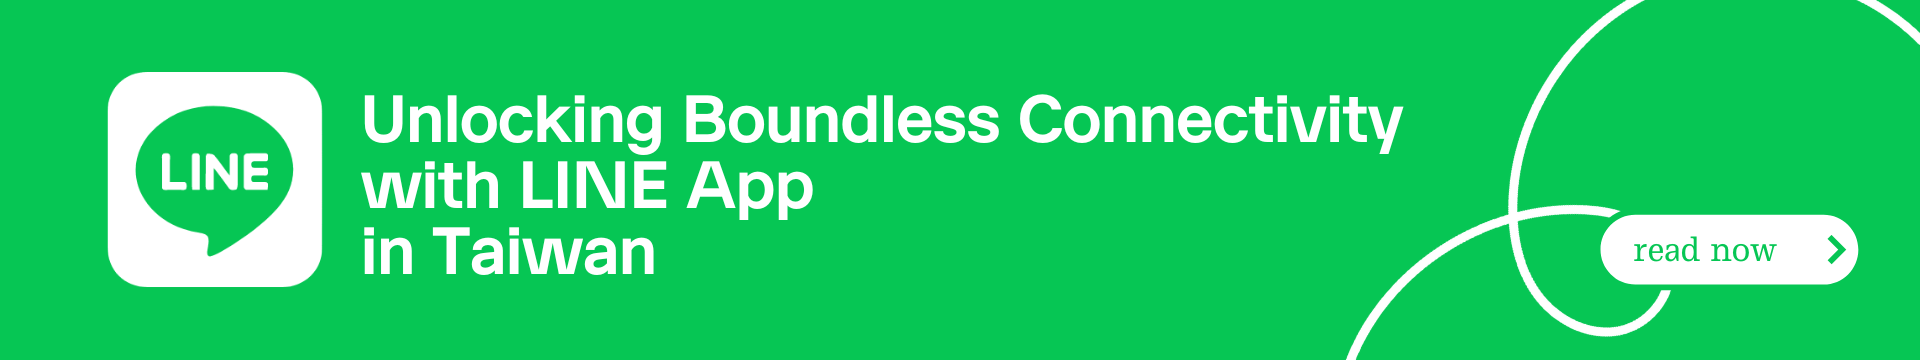 Unlocking Boundless Connectivity with LINE App in Taiwan